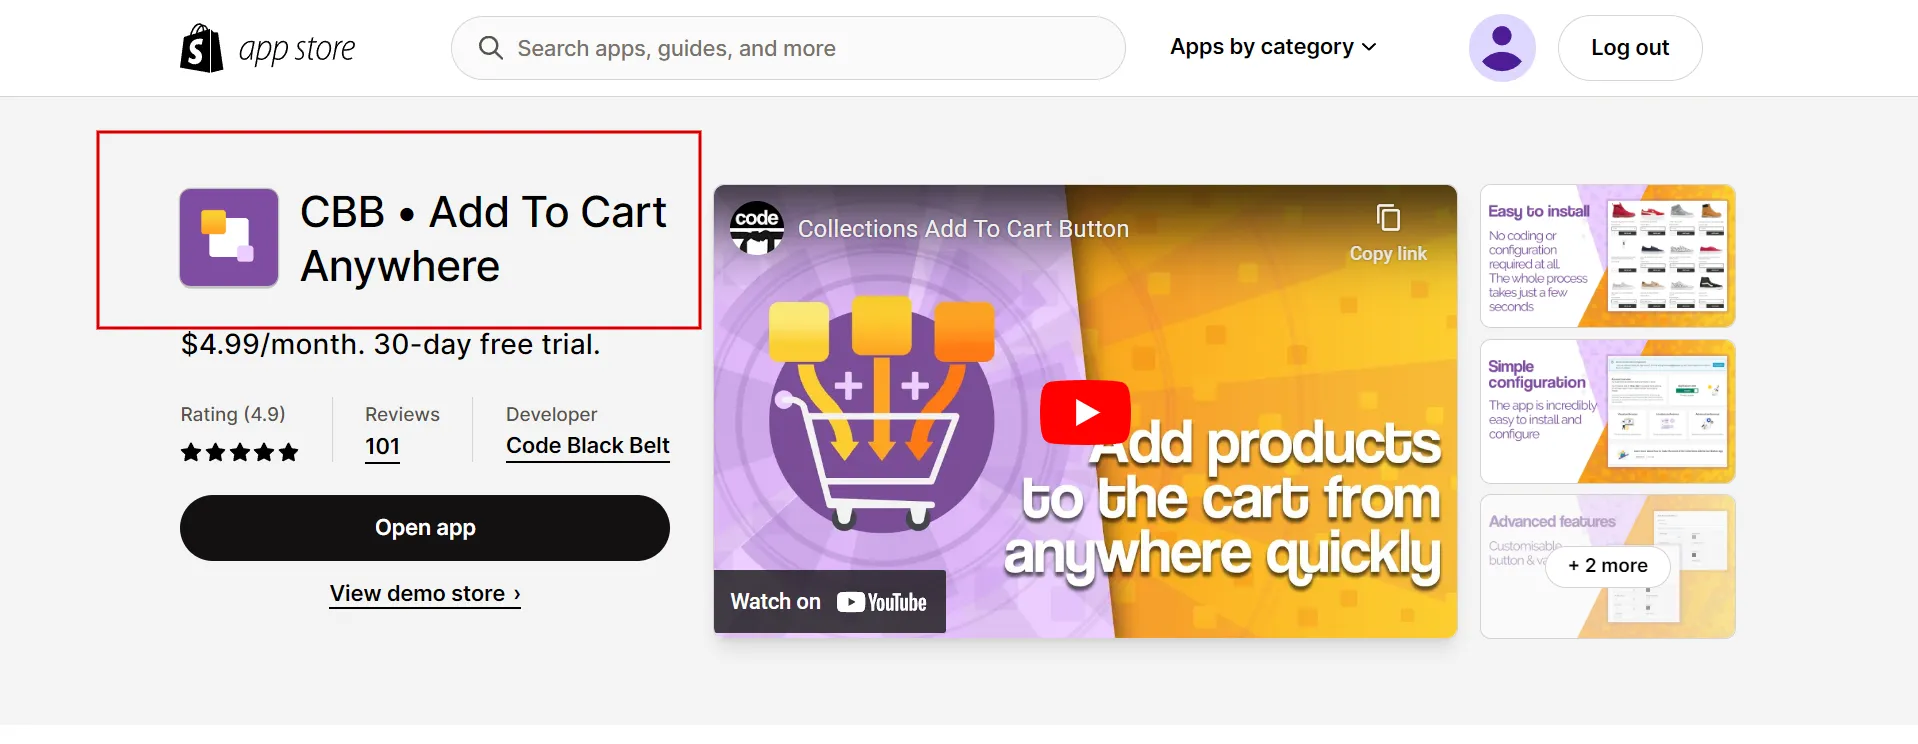 How to add add-to-cart button on Shopify using apps